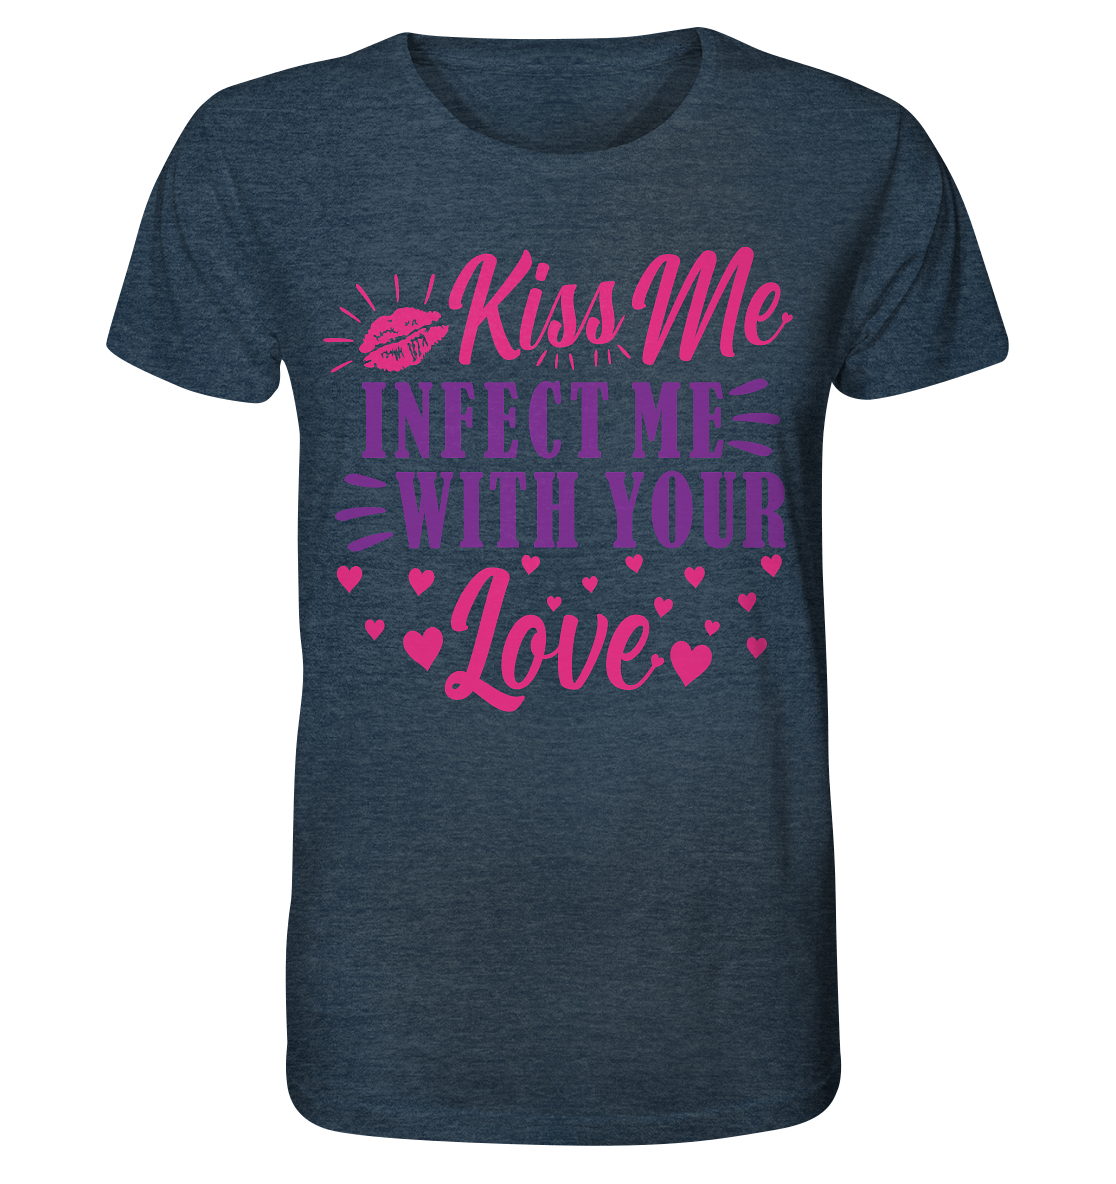 Kiss me infect me with your love - Organic Shirt (meliert)